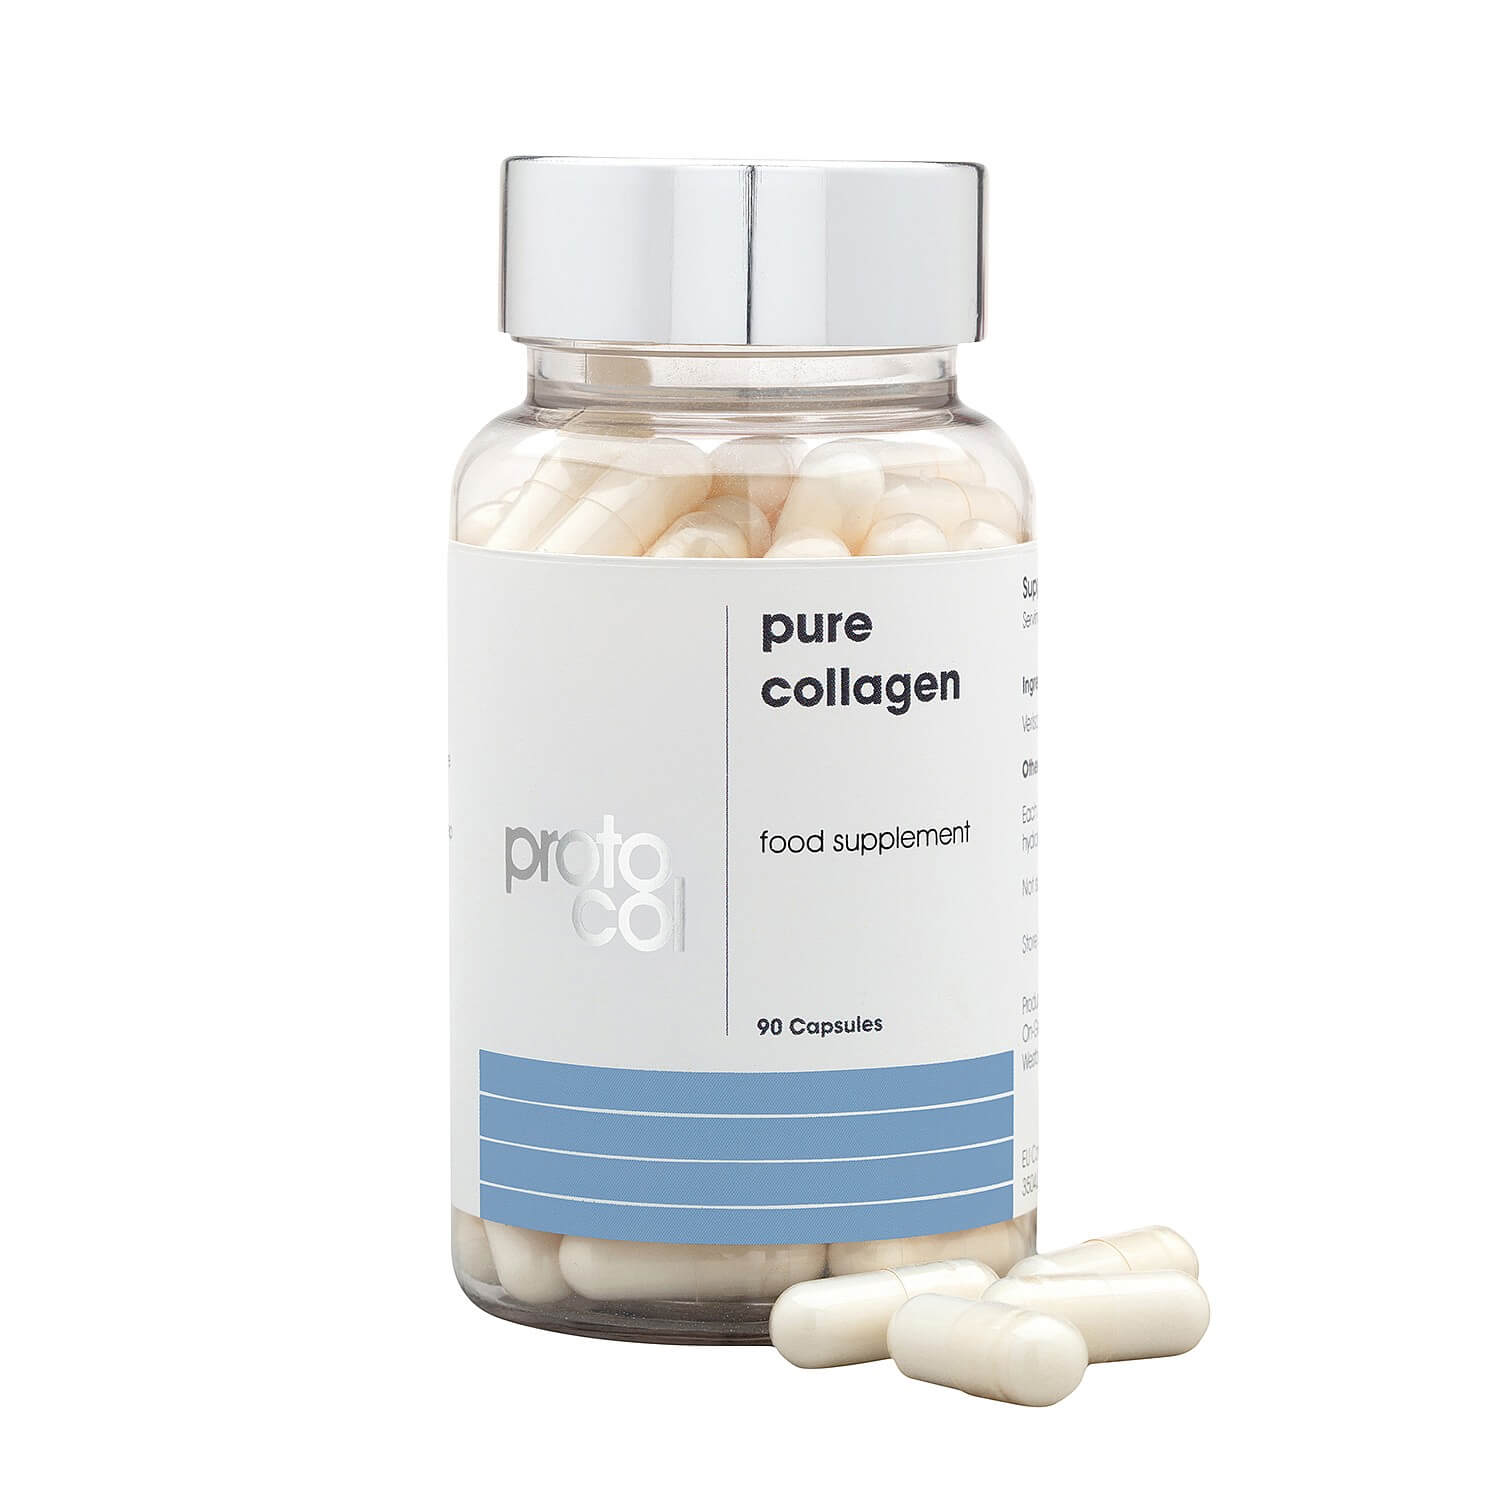 Pack of 90 Protocol Collagen Capsules - Buy 2 Get 1 Free